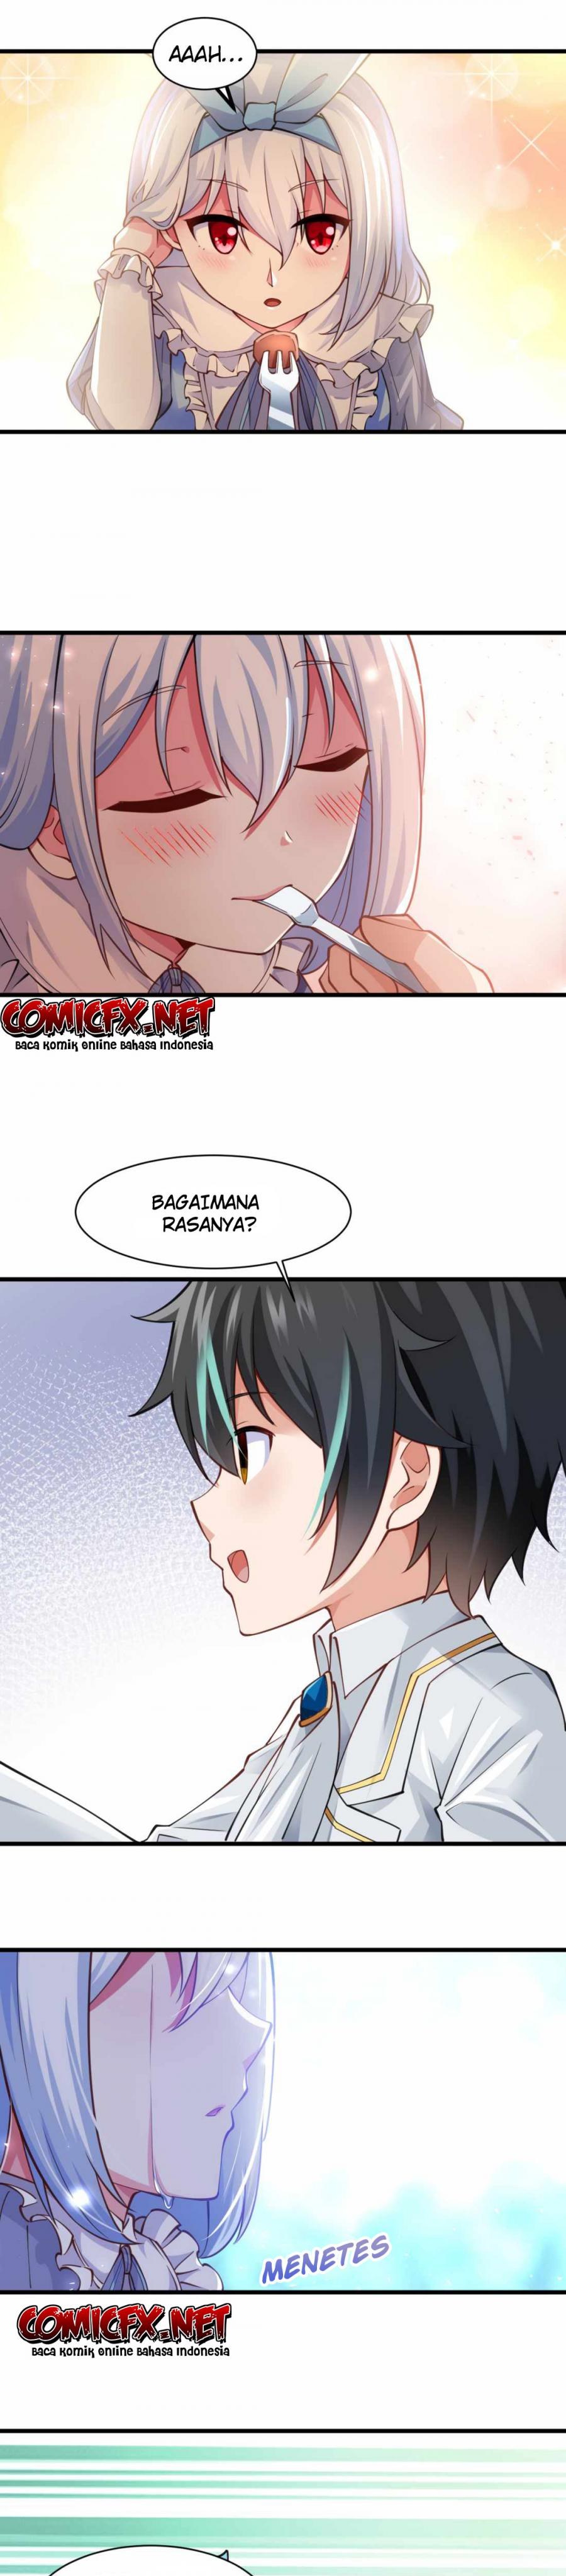 Dilarang COPAS - situs resmi www.mangacanblog.com - Komik little tyrant doesnt want to meet with a bad end 002 - chapter 2 3 Indonesia little tyrant doesnt want to meet with a bad end 002 - chapter 2 Terbaru 14|Baca Manga Komik Indonesia|Mangacan